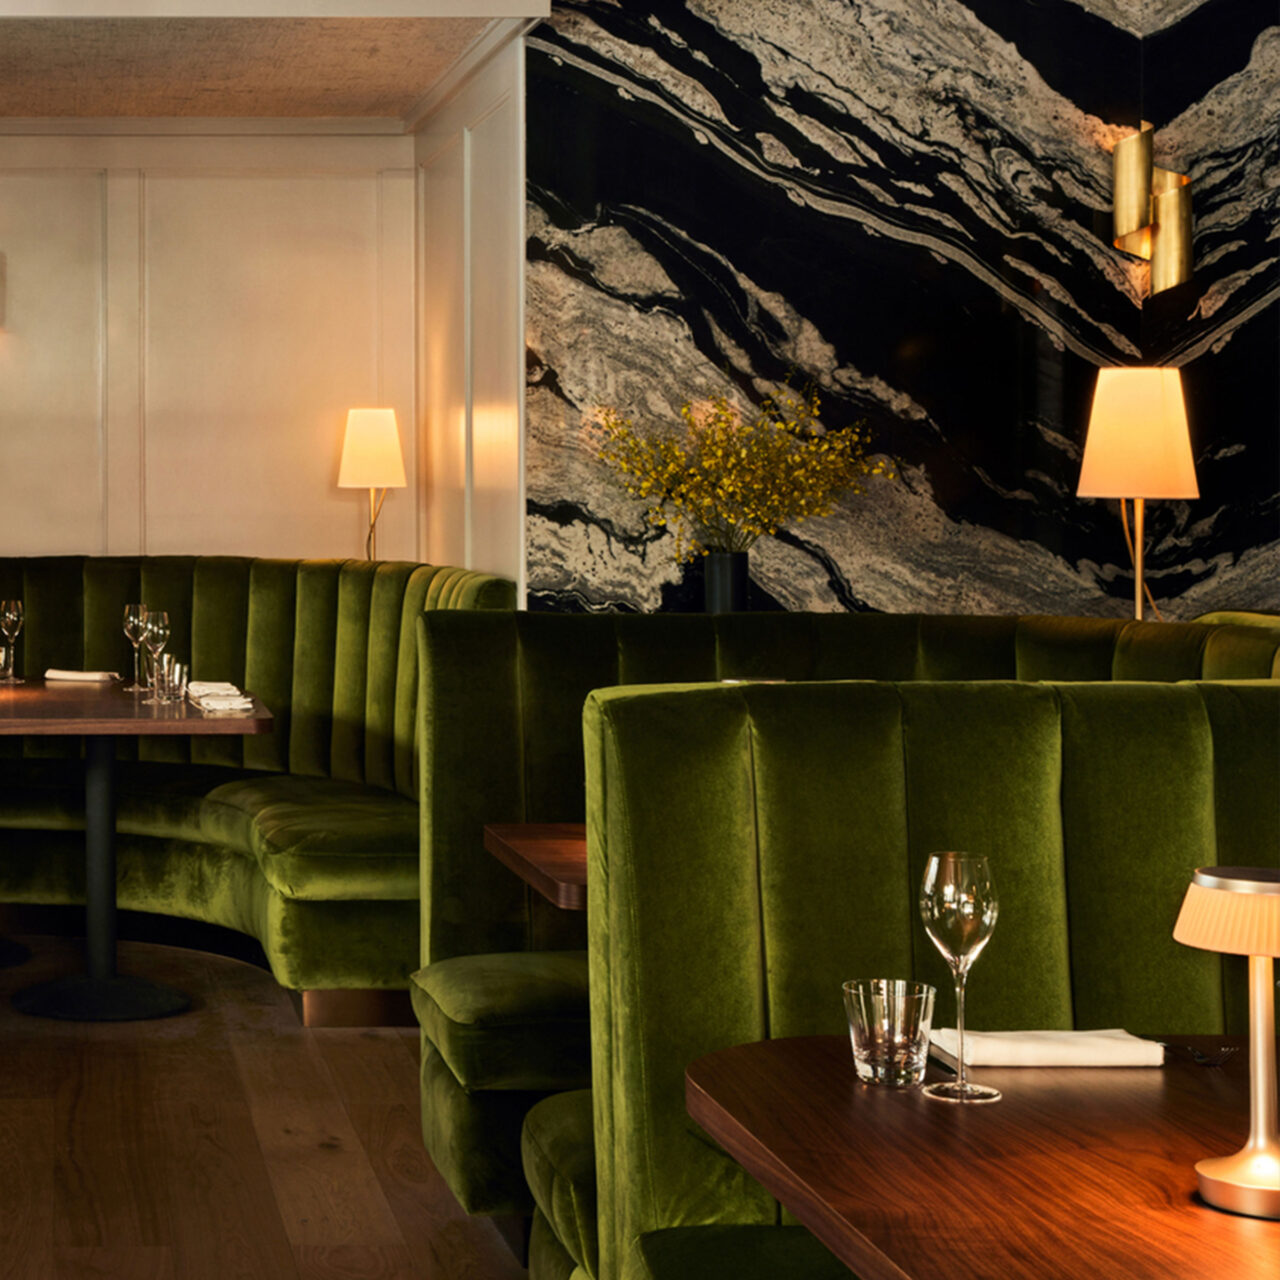 An intimate restaurant interior featuring luxurious green velvet banquette seating by SENTIENT Furniture, with a dark marbled wall accent and warm ambient lighting, creating a cozy dining atmosphere.